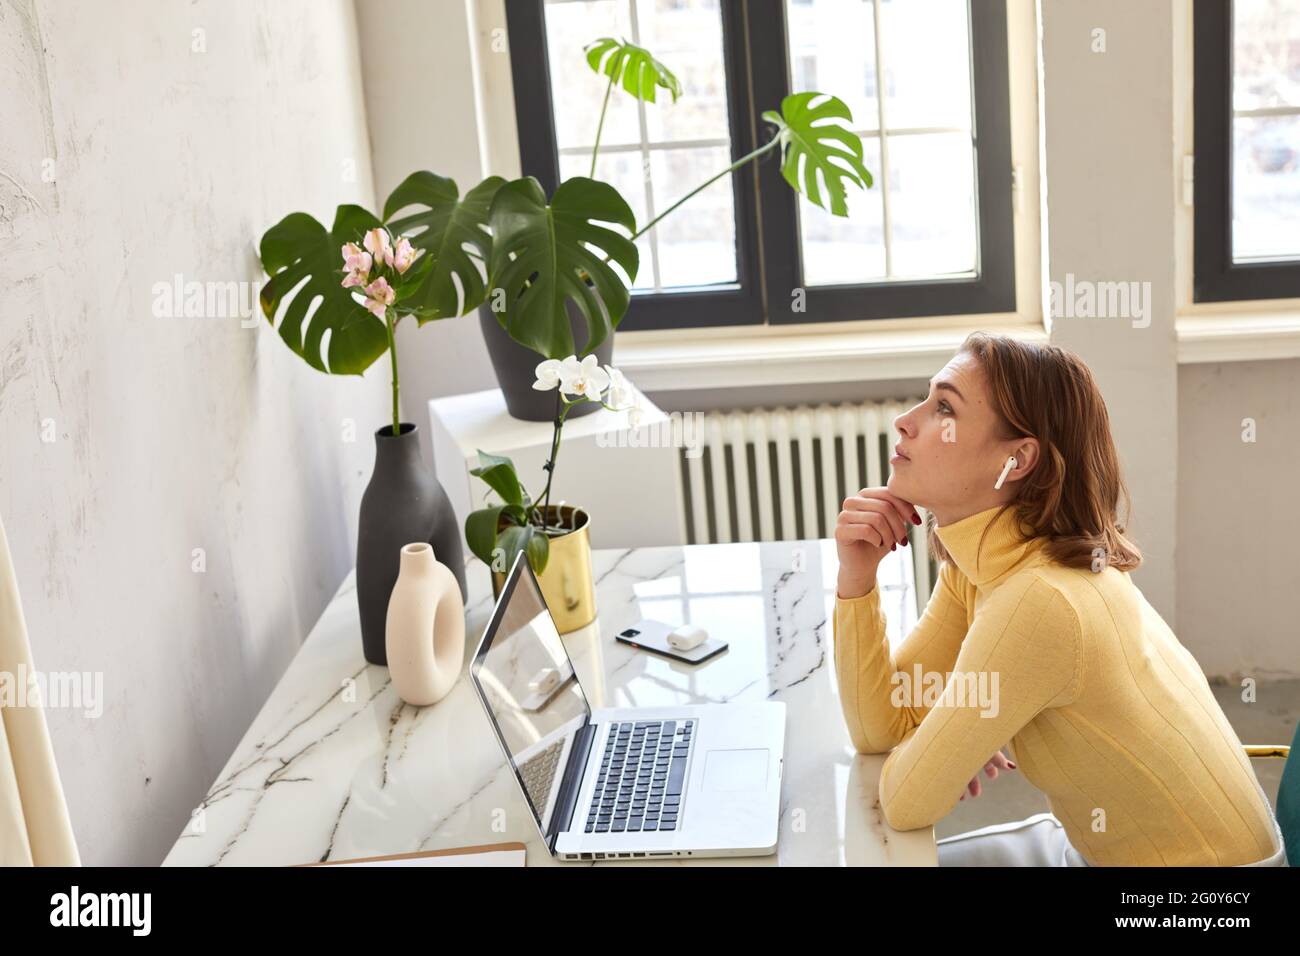 Side view of female in wireless earphones sitting at table with netbook and enjoying music and looking up Stock Photo